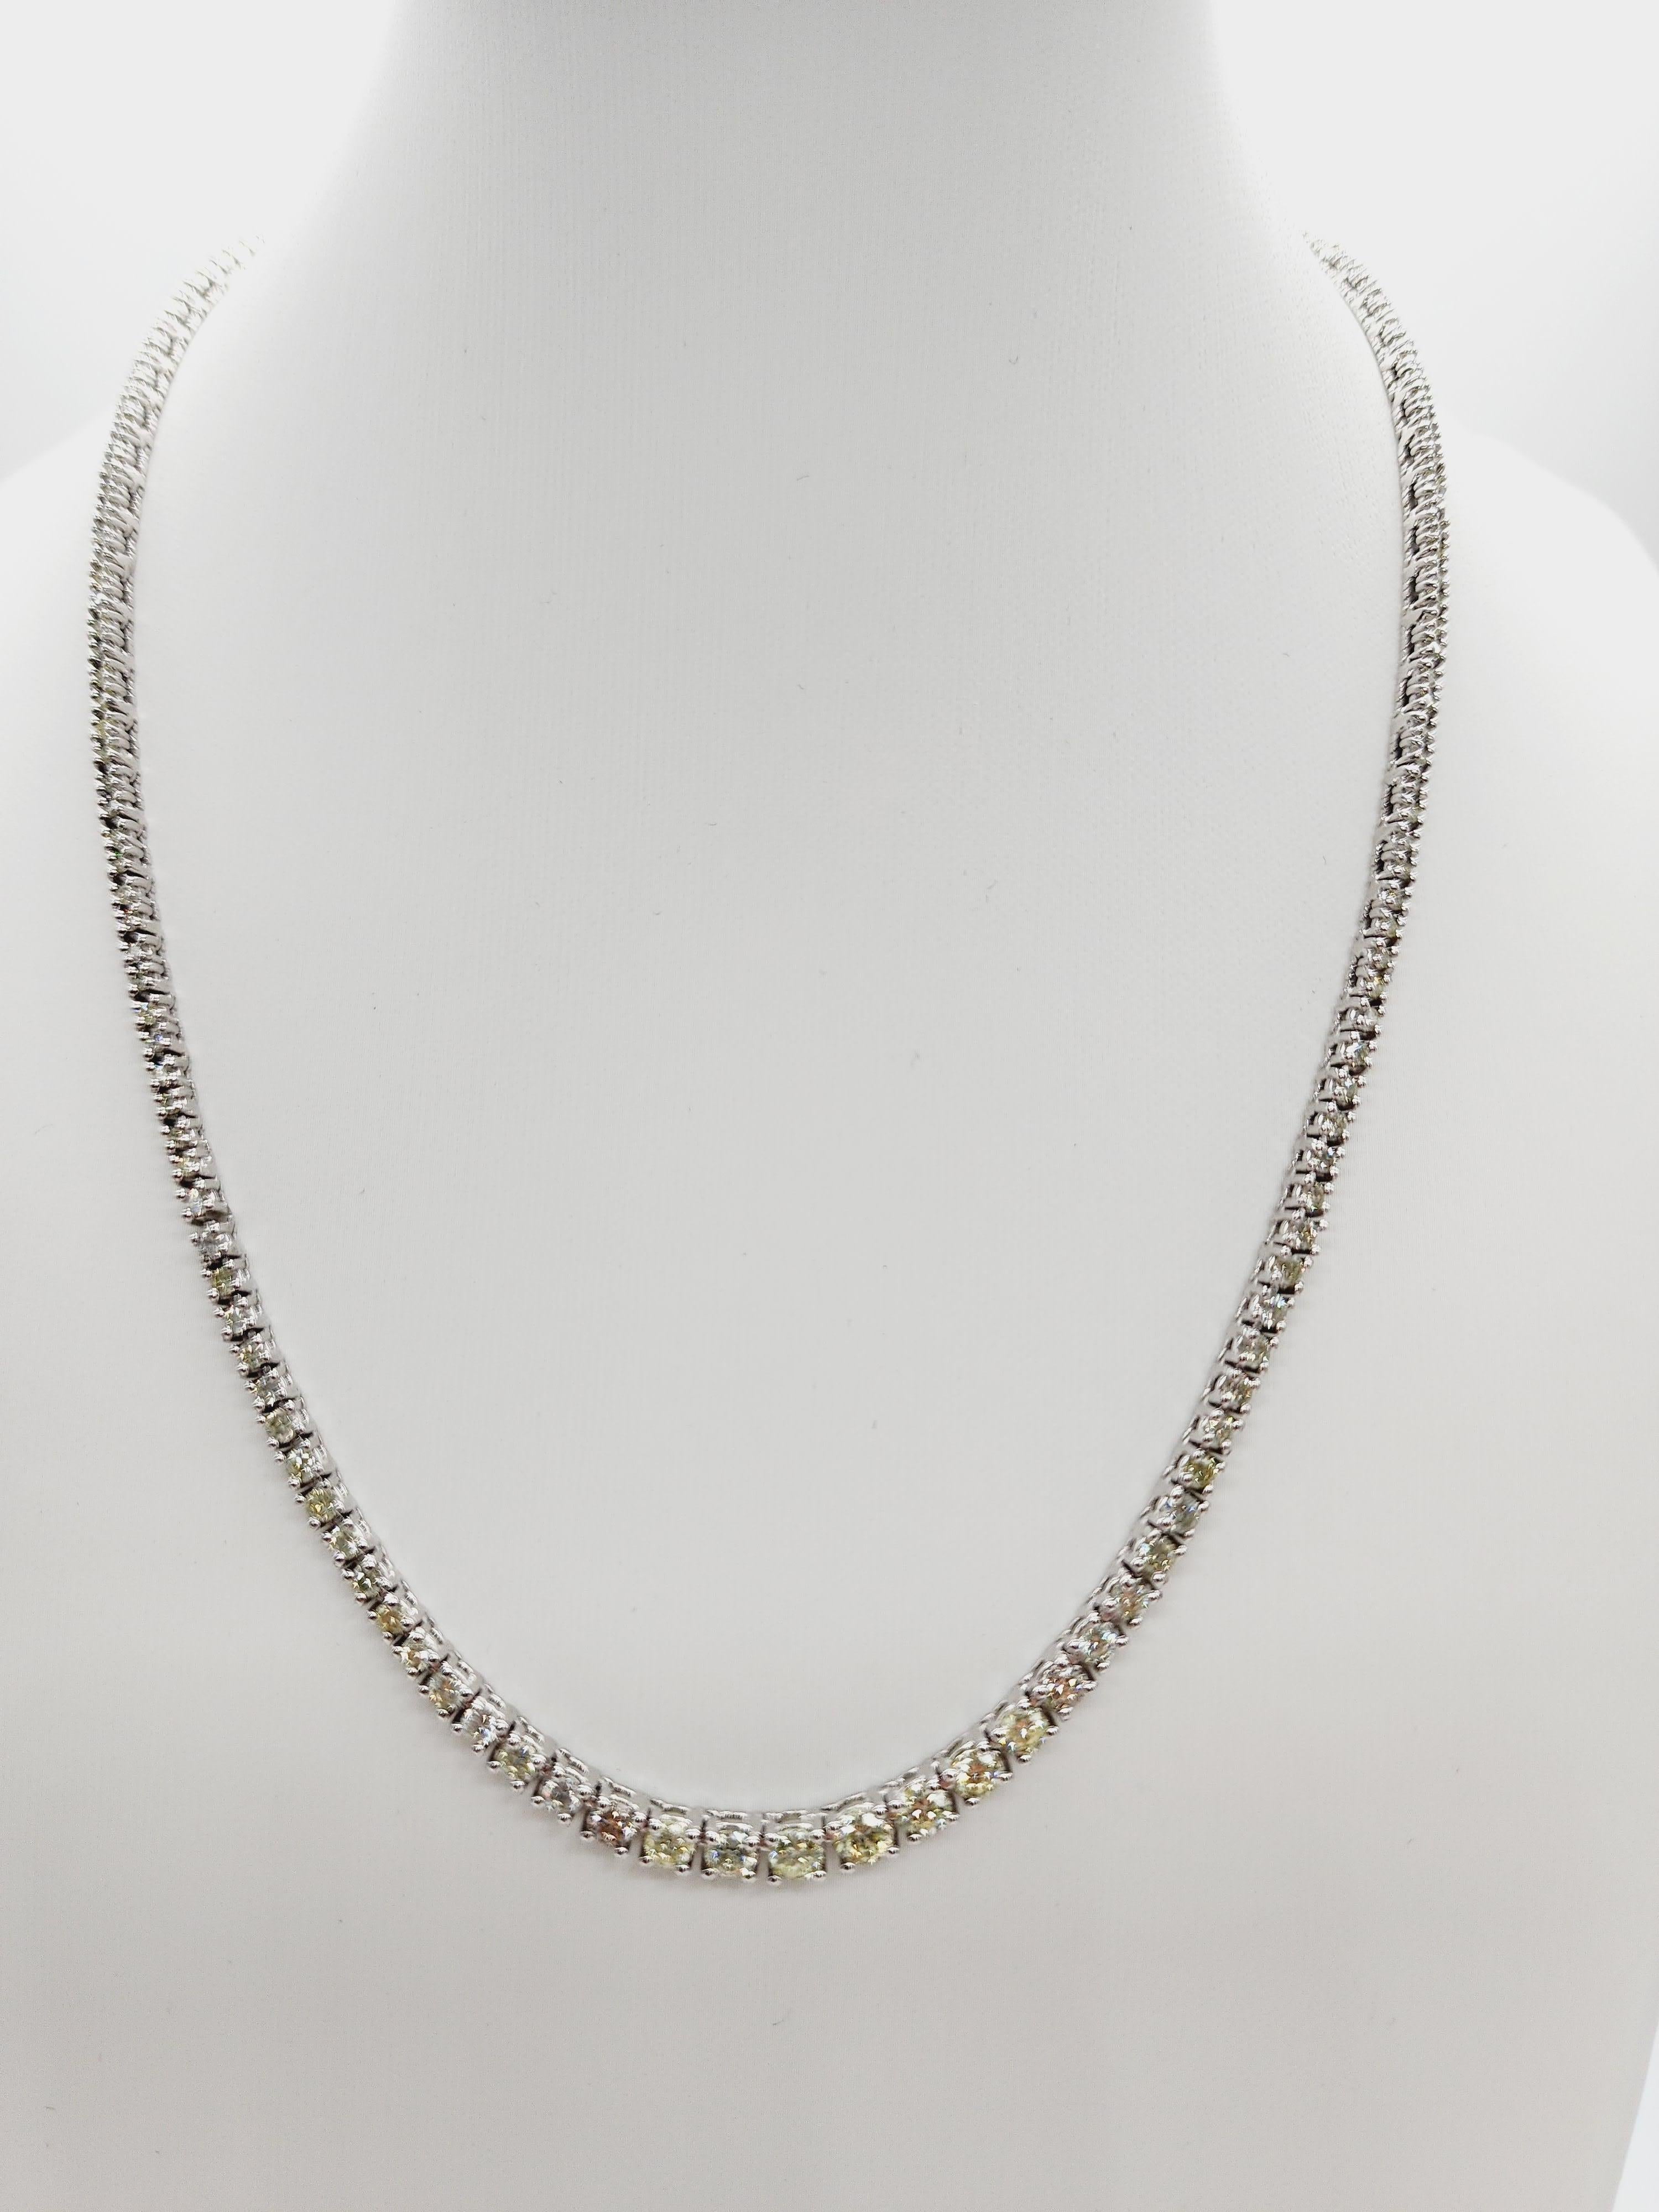 Brilliant and beautiful Riviera necklace, round-brilliant cut natural diamonds. 
14k white gold classic four-prong style for maximum light brilliance.
17 inch length. Average color J Color, I Clarity. 